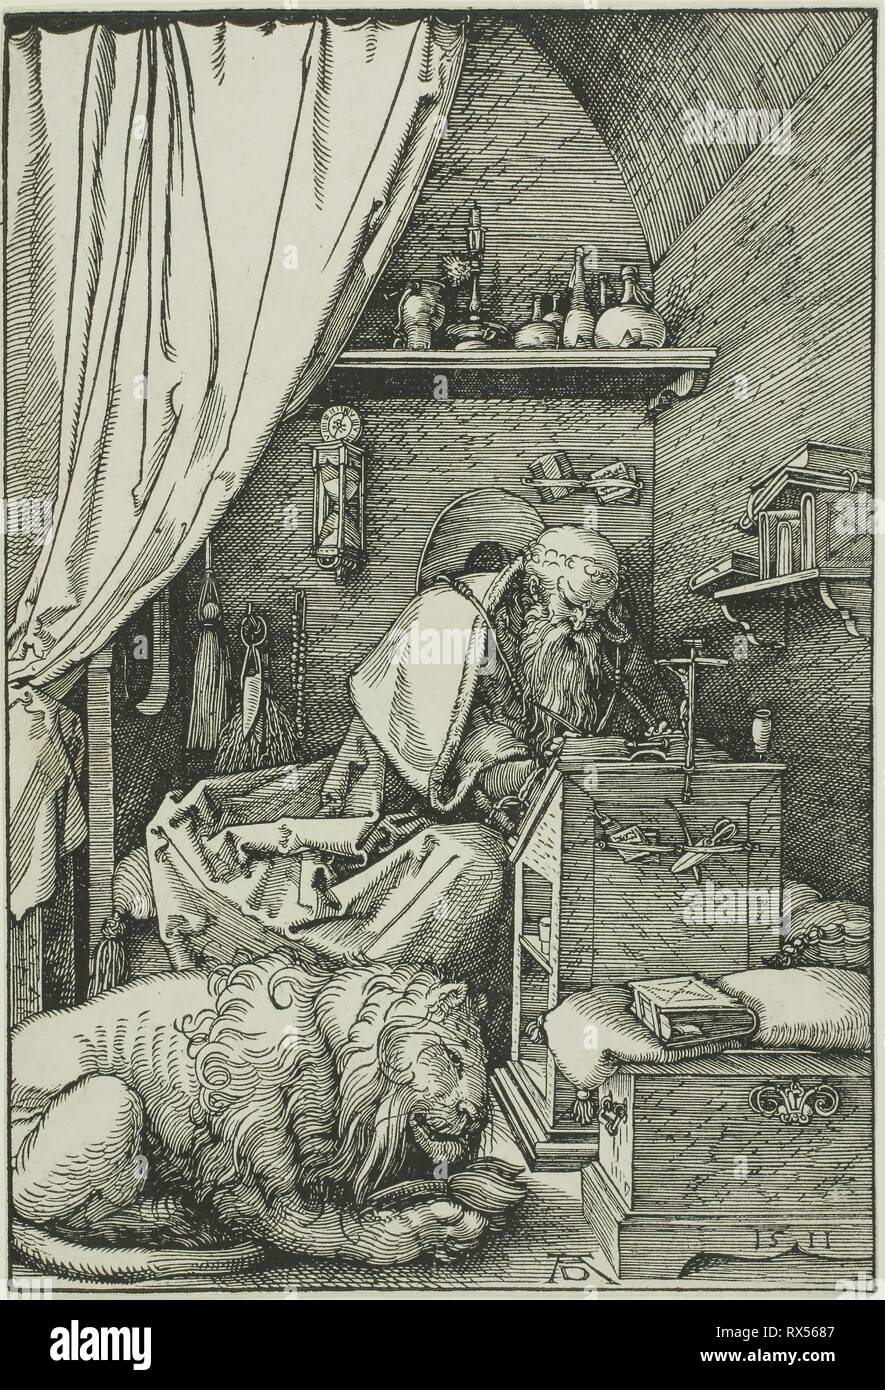 Saint Jerome in his Cell. Albrecht Dürer; German, 1471-1528. Date: 1511. Dimensions: 238 x 162 mm. Woodcut in black on ivory laid paper. Origin: Germany. Museum: The Chicago Art Institute. Stock Photo